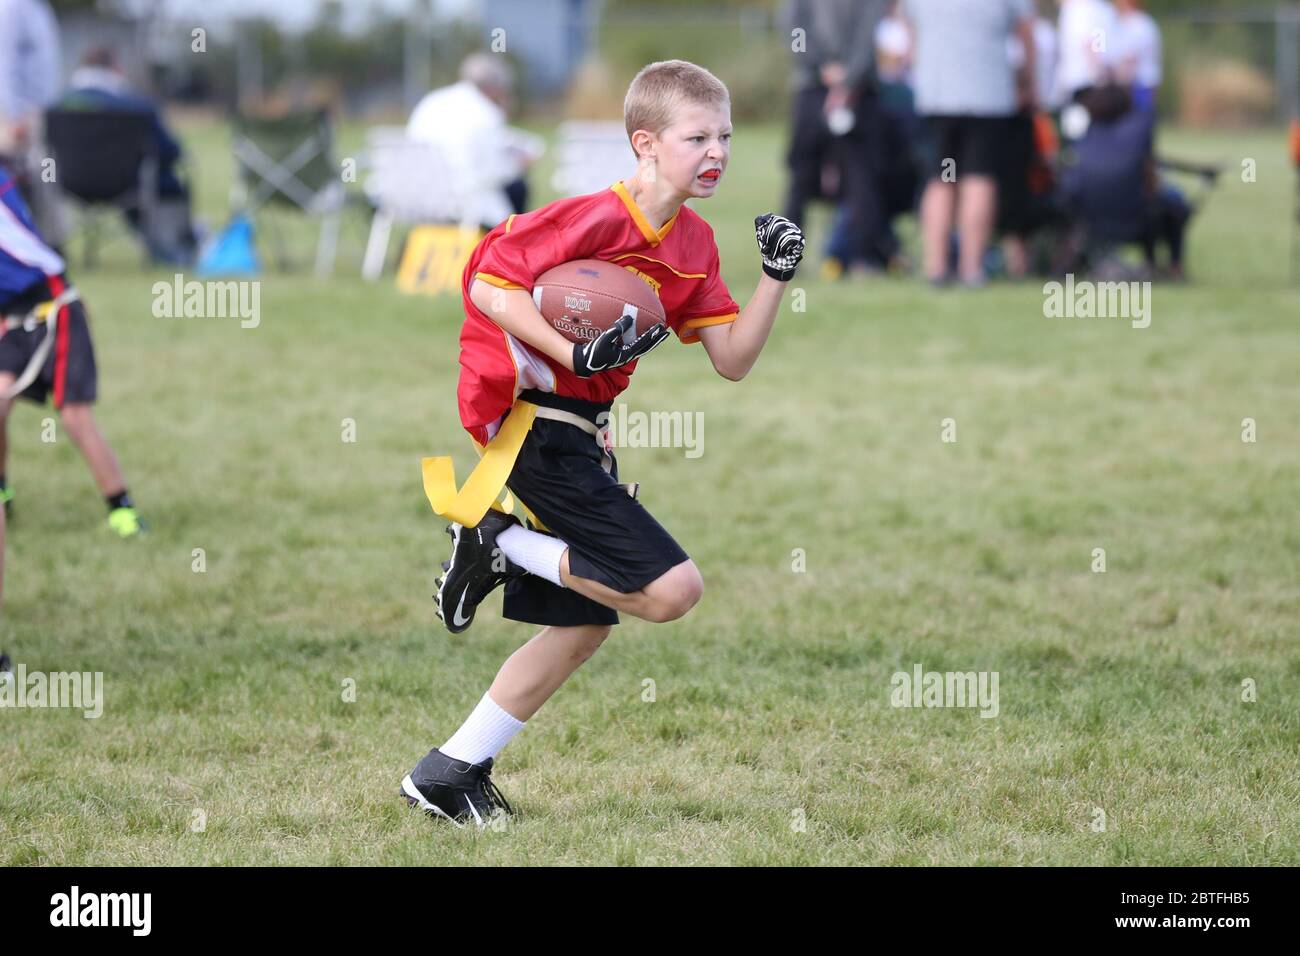 Youth flag football game action shot of player running with the football attempting to score a touchdown. Stock Photo